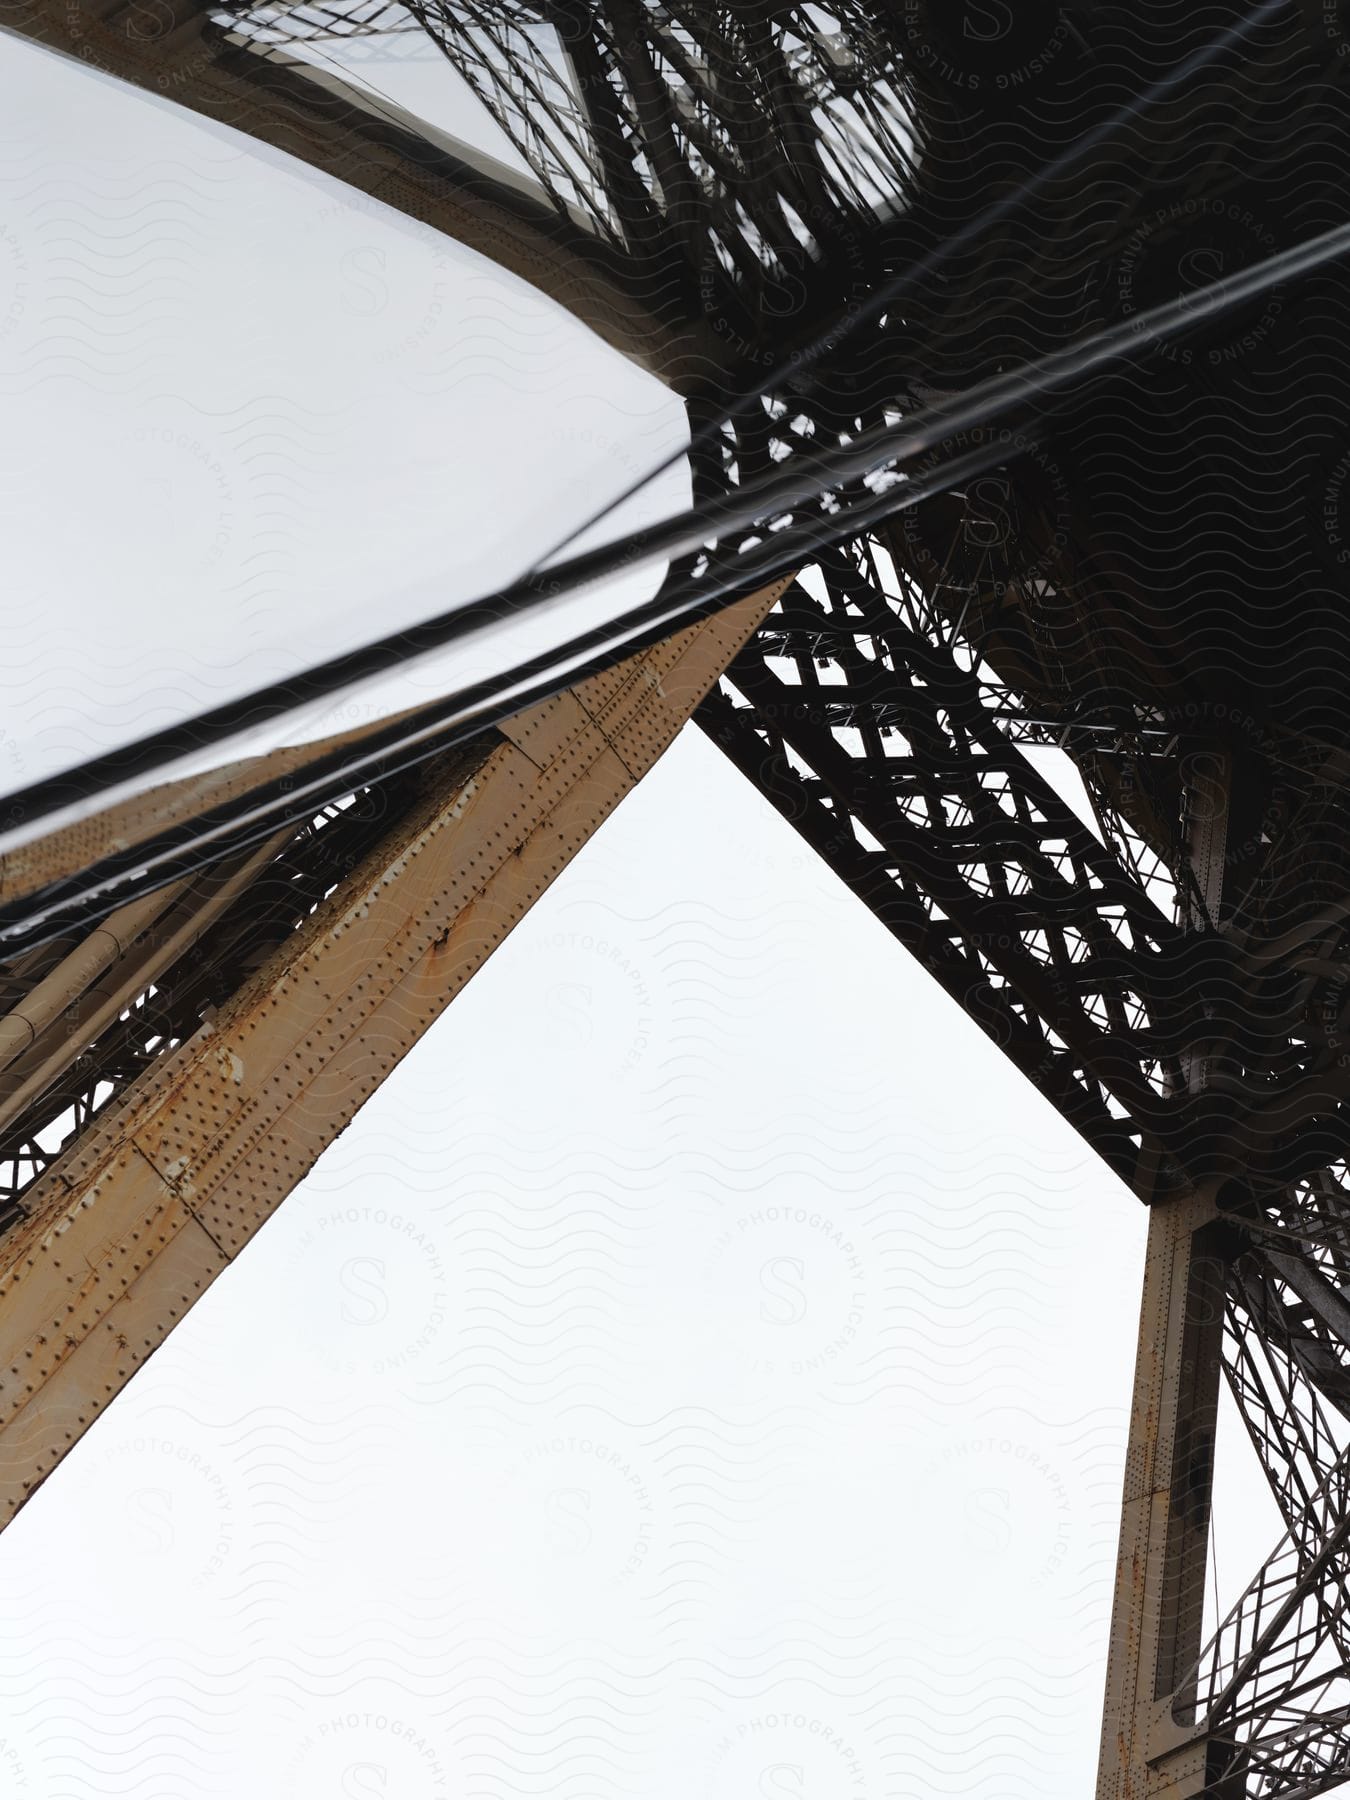 Stock photo of the structural framework of the eiffel tower against the sky